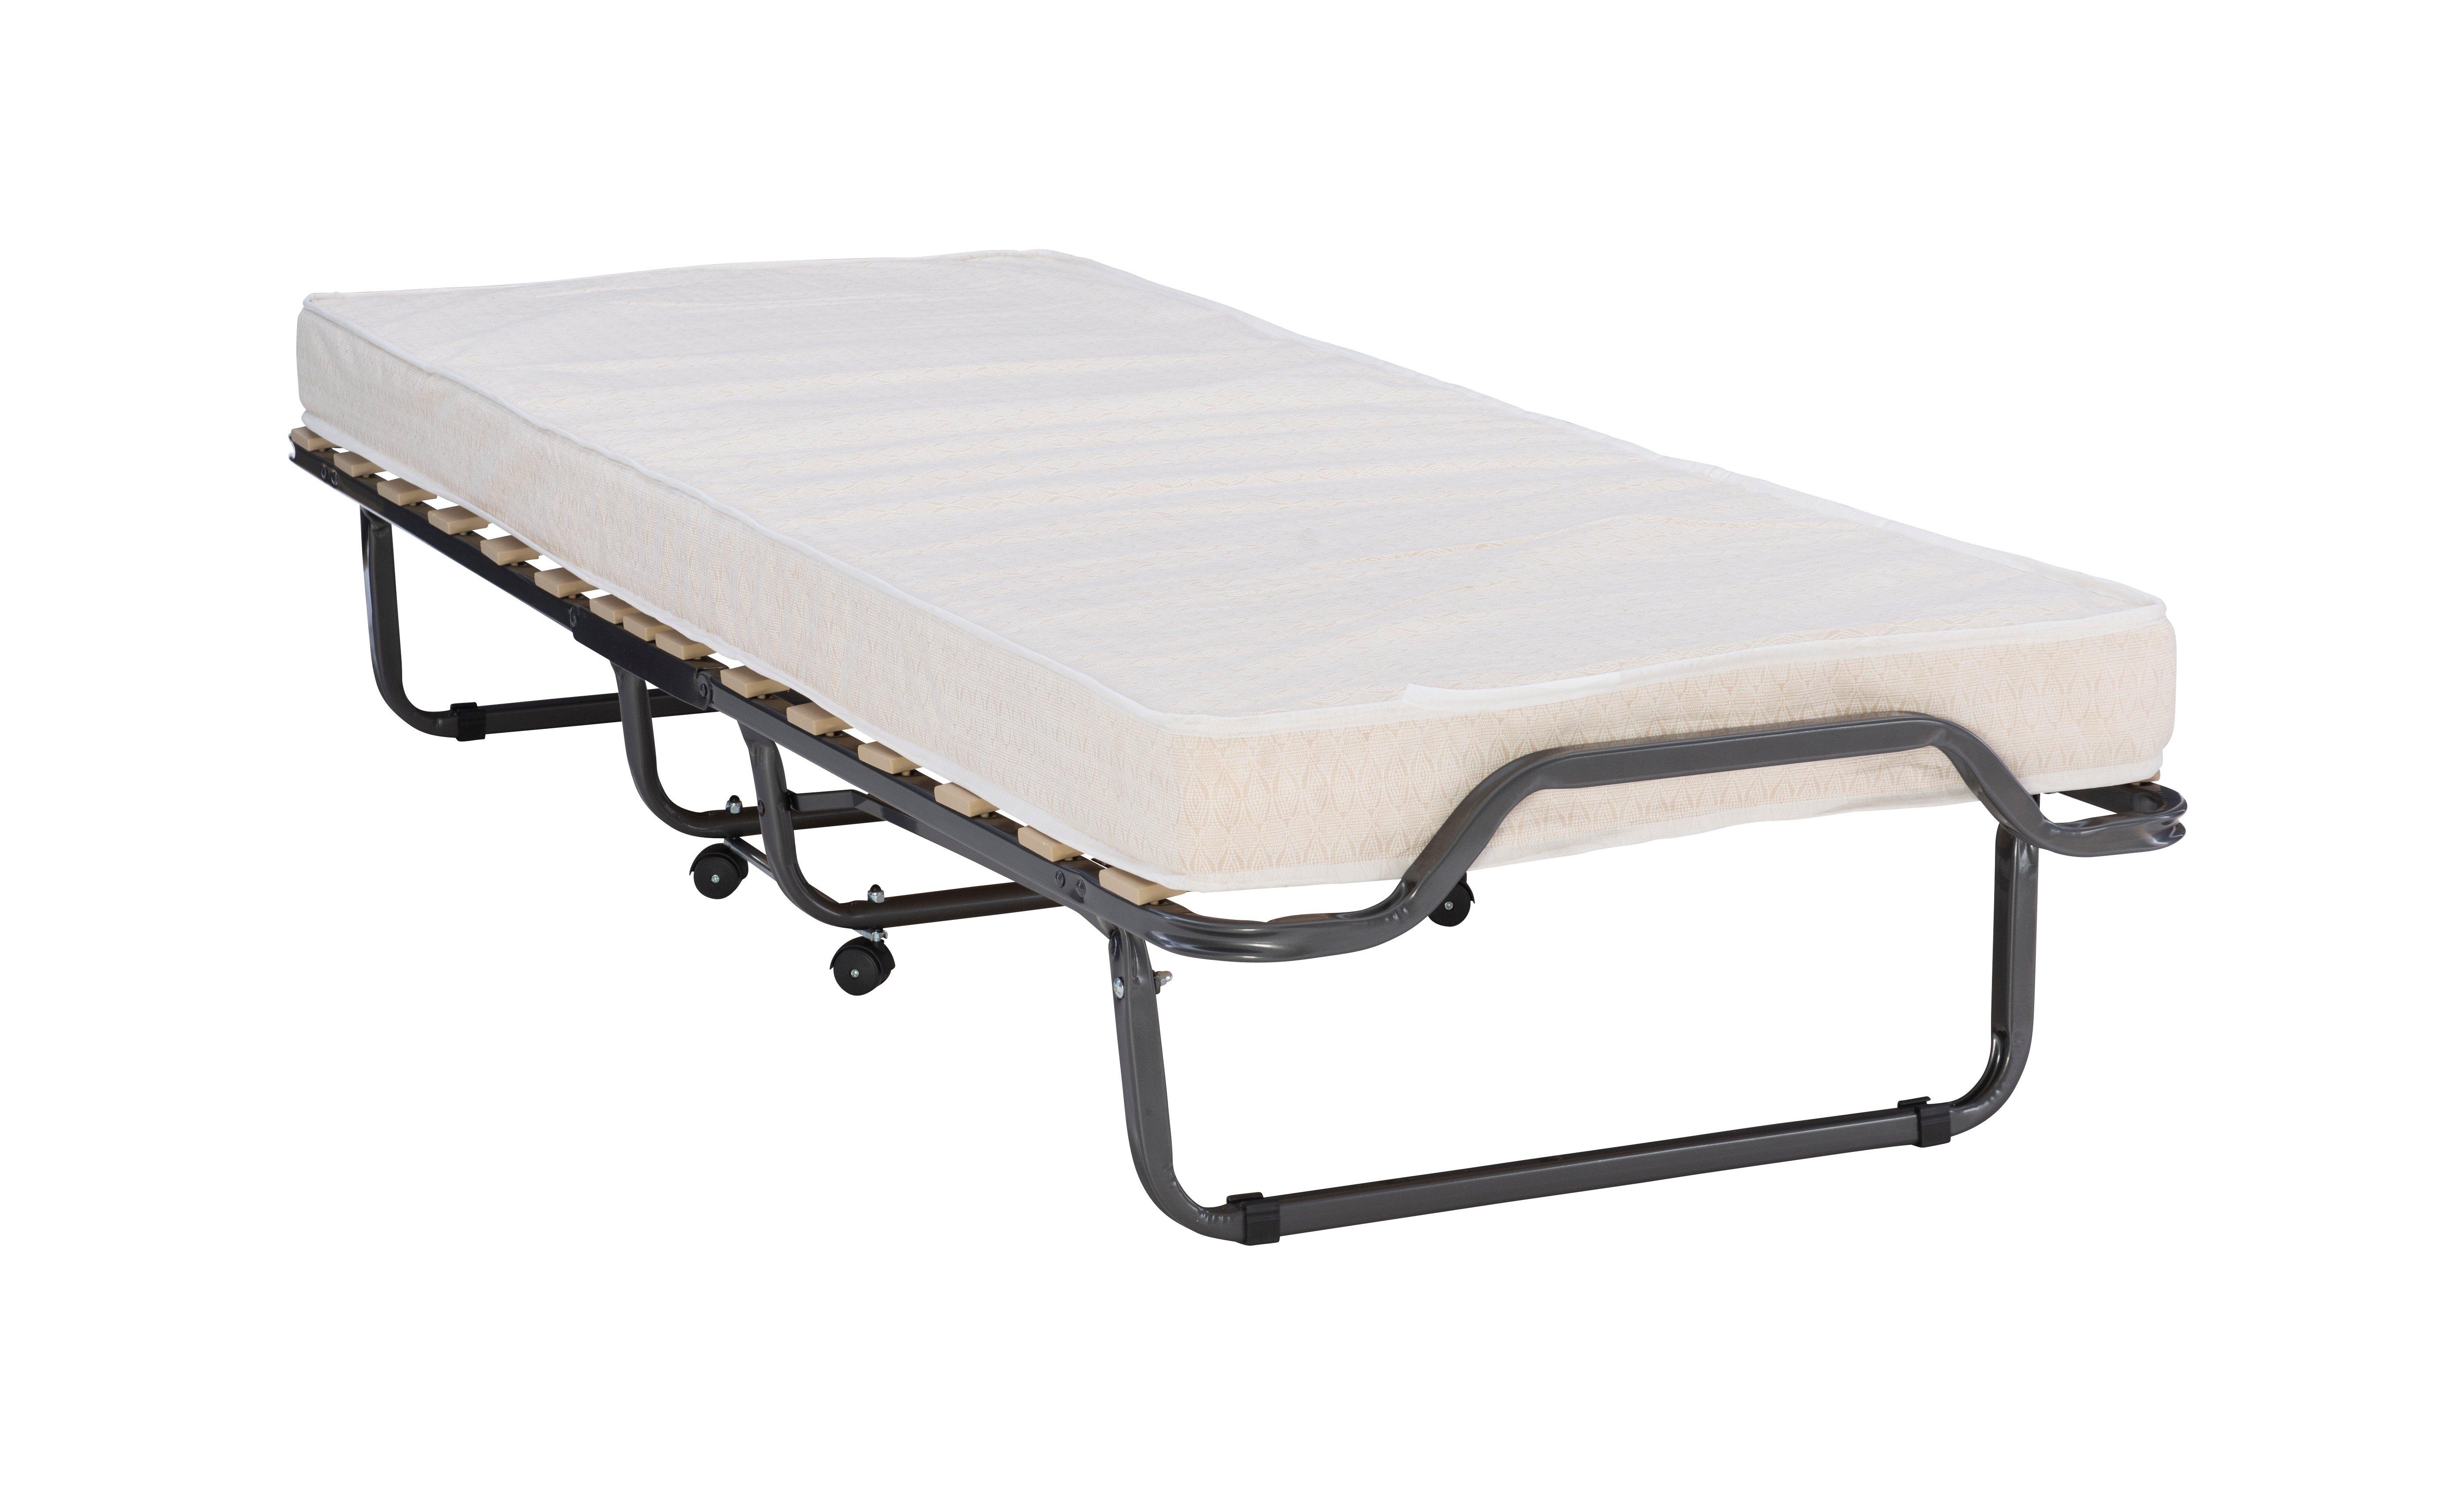 Linon Belmont Folding Bed with Cover